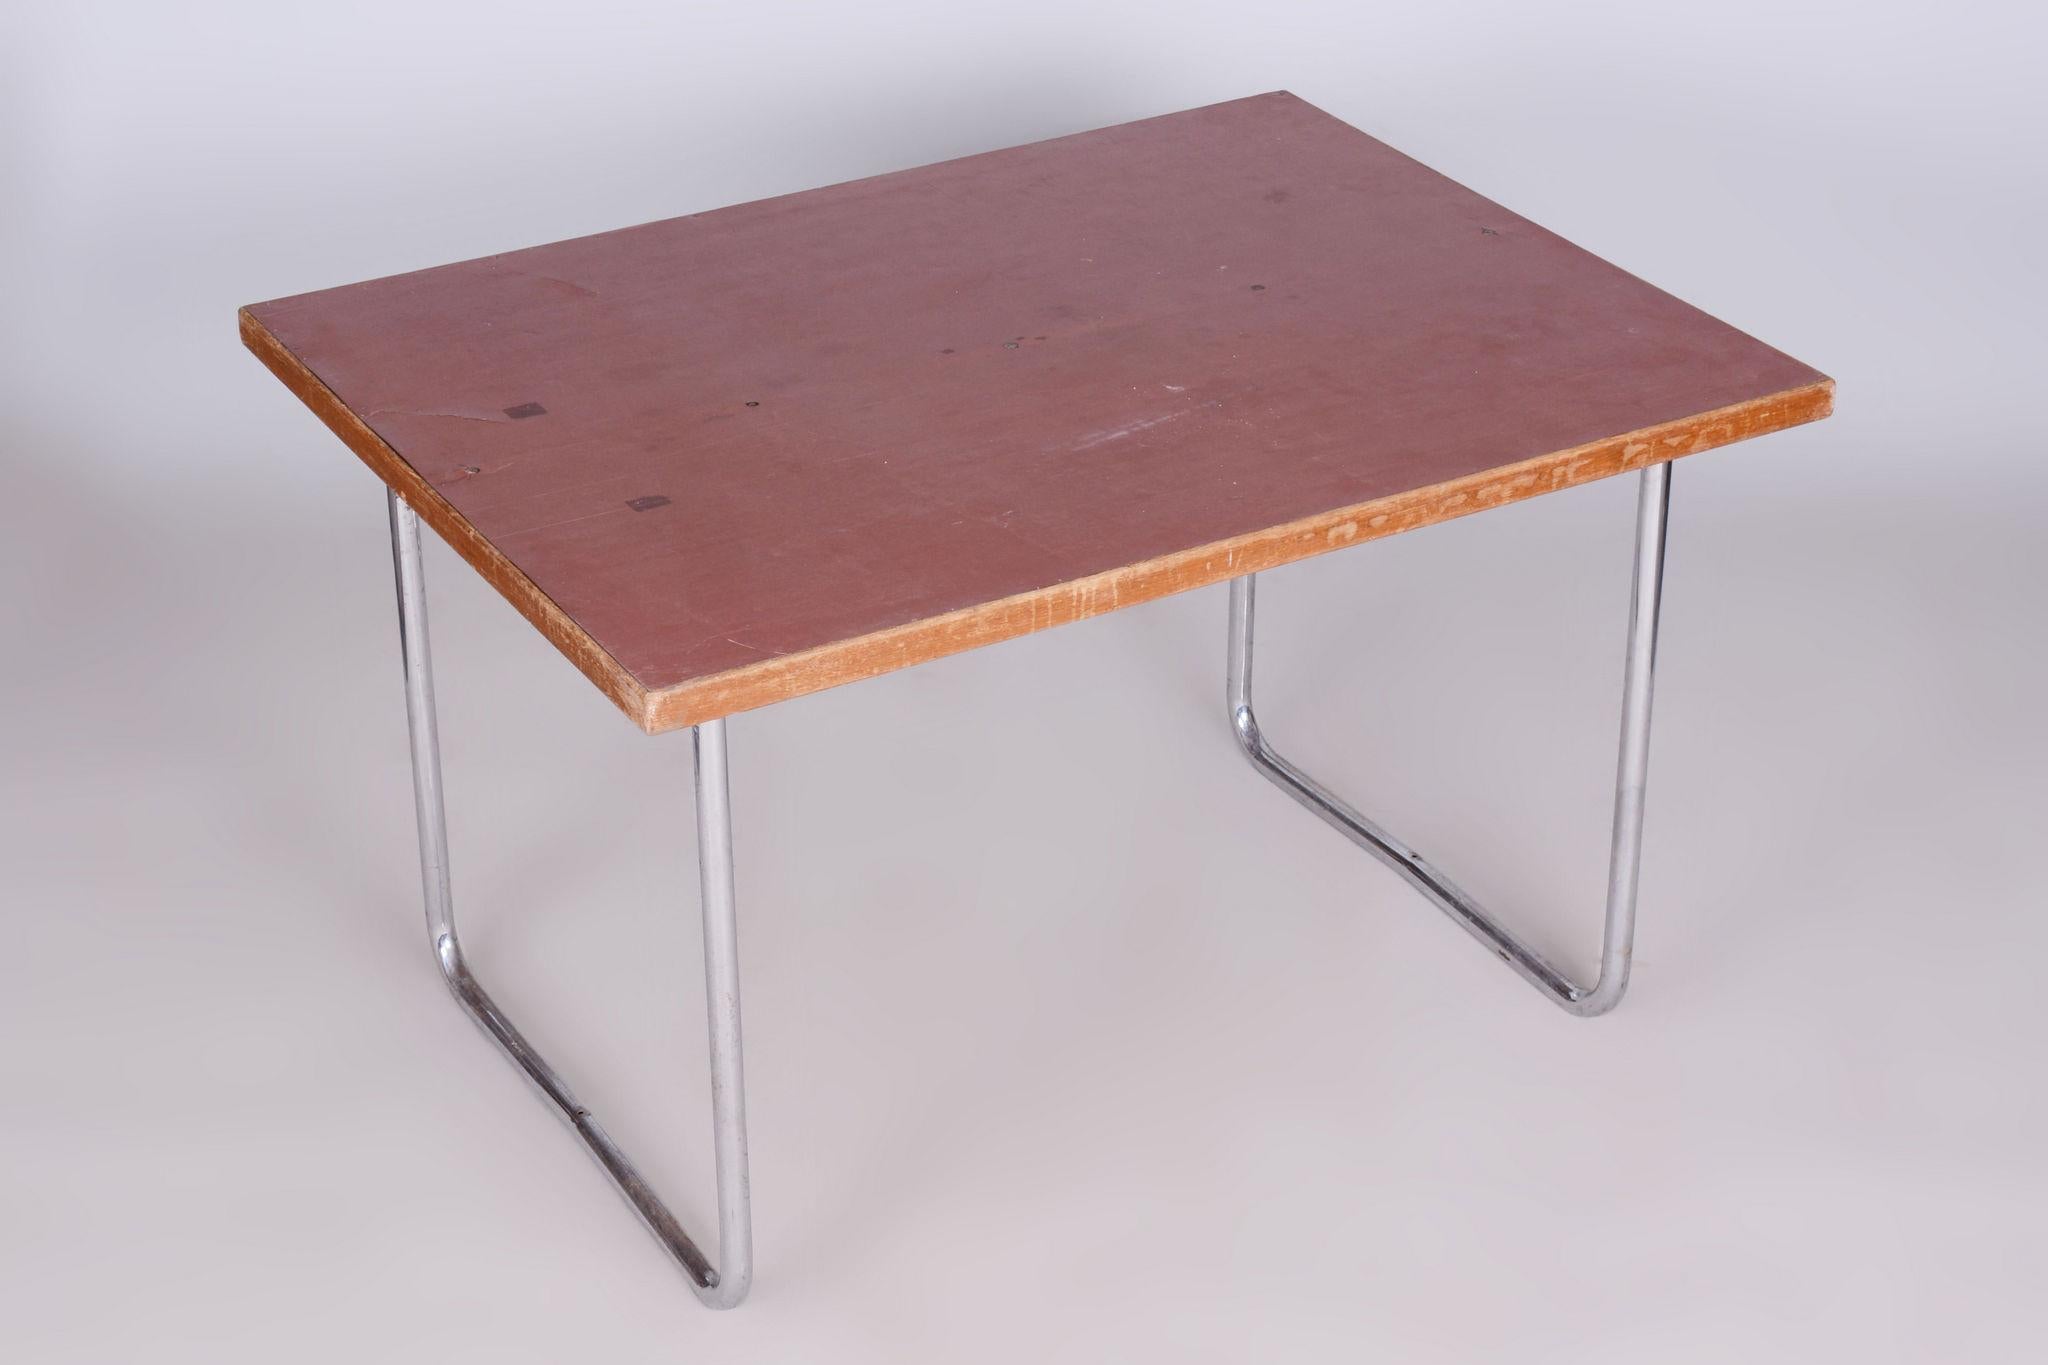 Spruce Original Bauhaus Dining Table, by Mücke - Melder, Well Preserved, Czech, 1930s For Sale